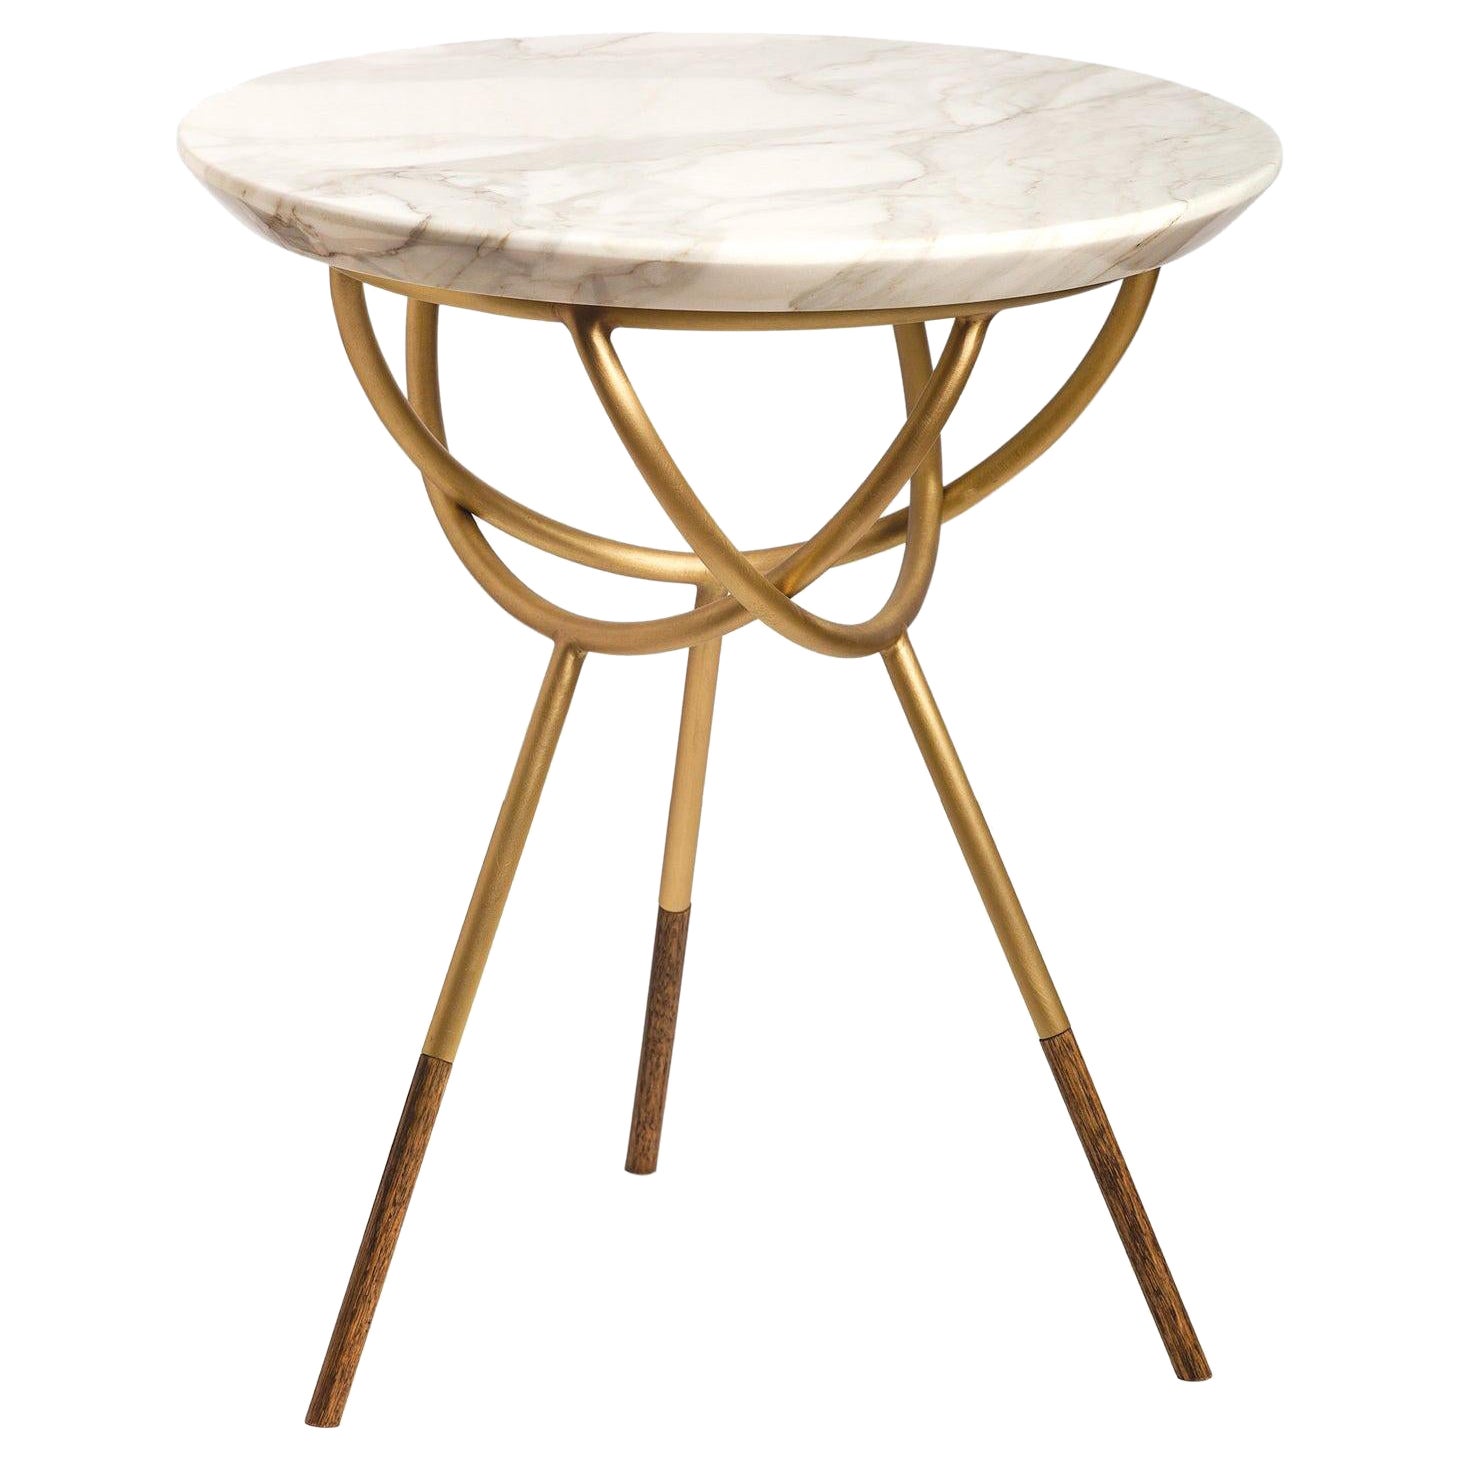 Atlas Brushed Brass End Table with White Marble Top by Avram Rusu Studio For Sale